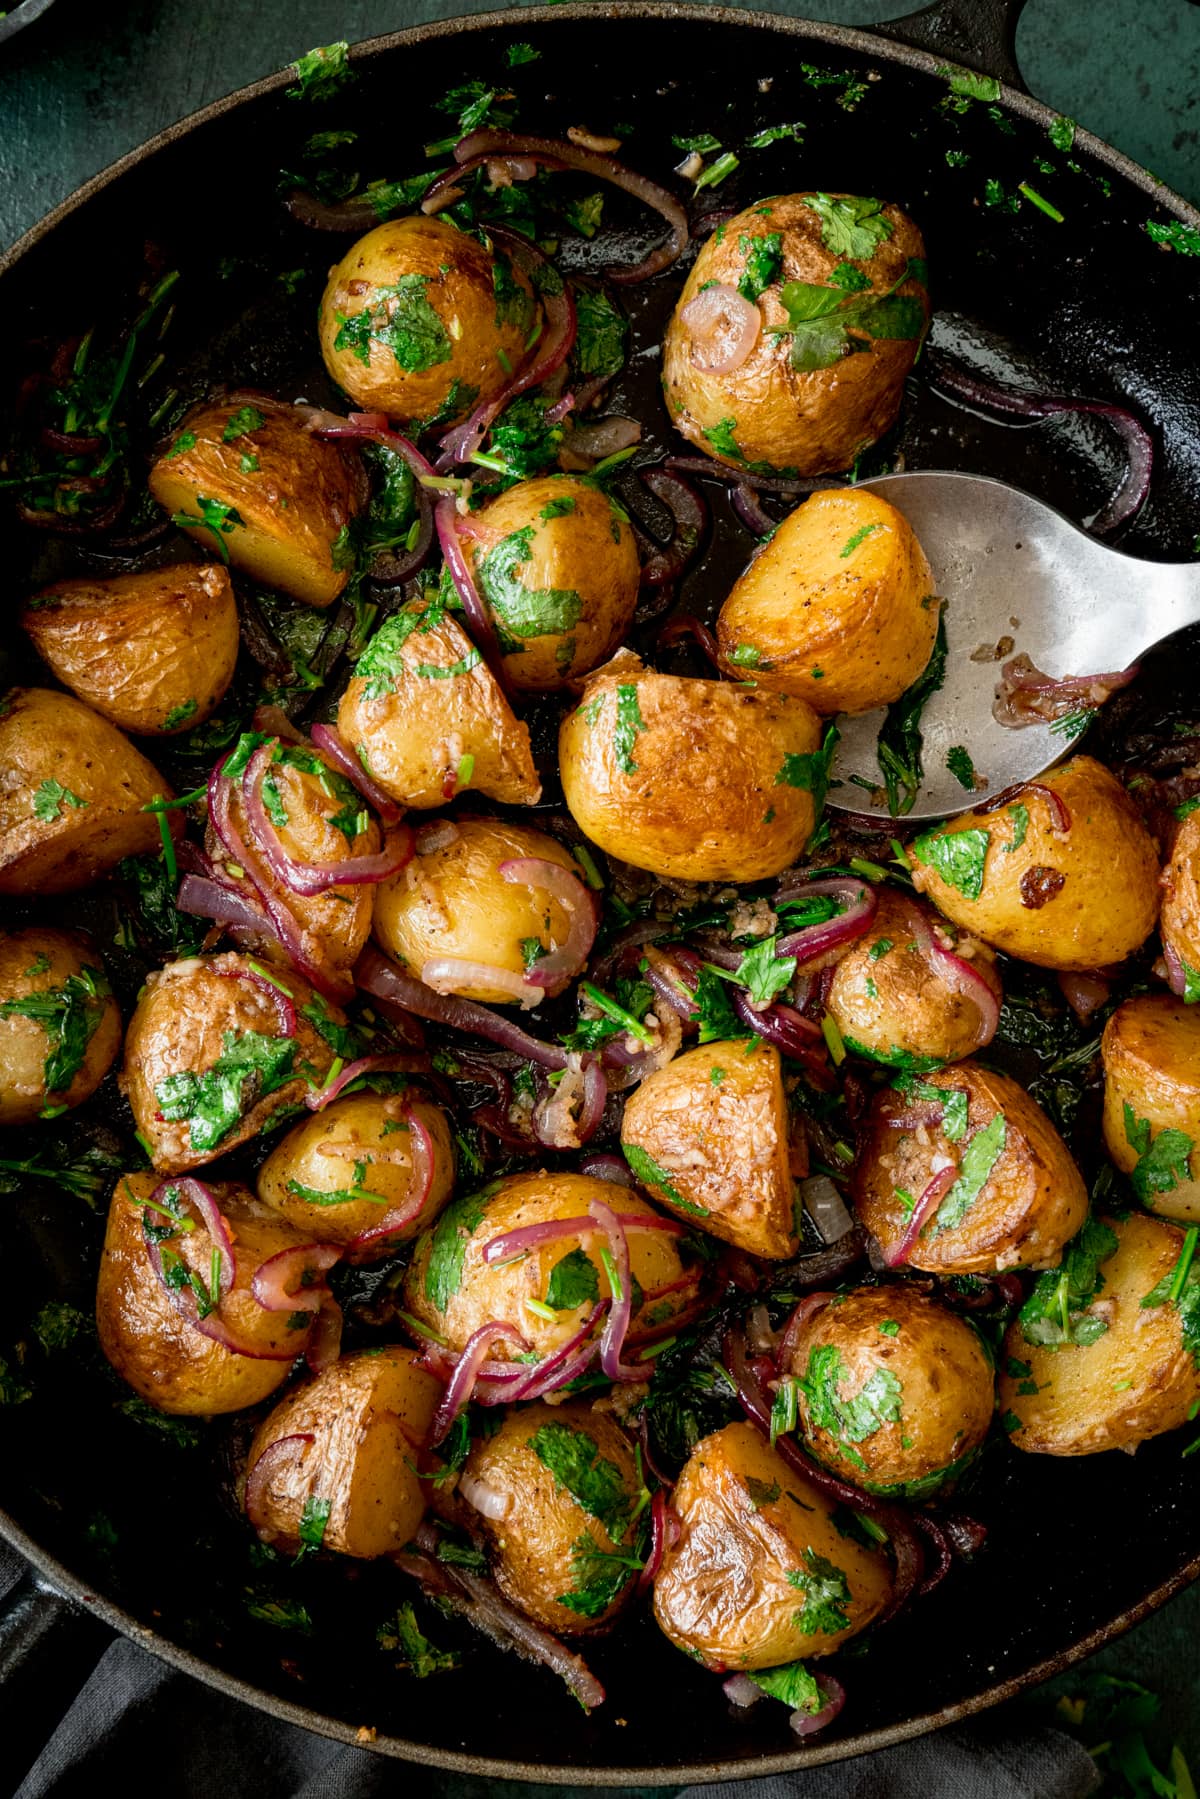 Overhead image of pan-fried potatoes with garlic, coriander and red onion in a black pan. There is a silver serving spoon sticking out of the pan.